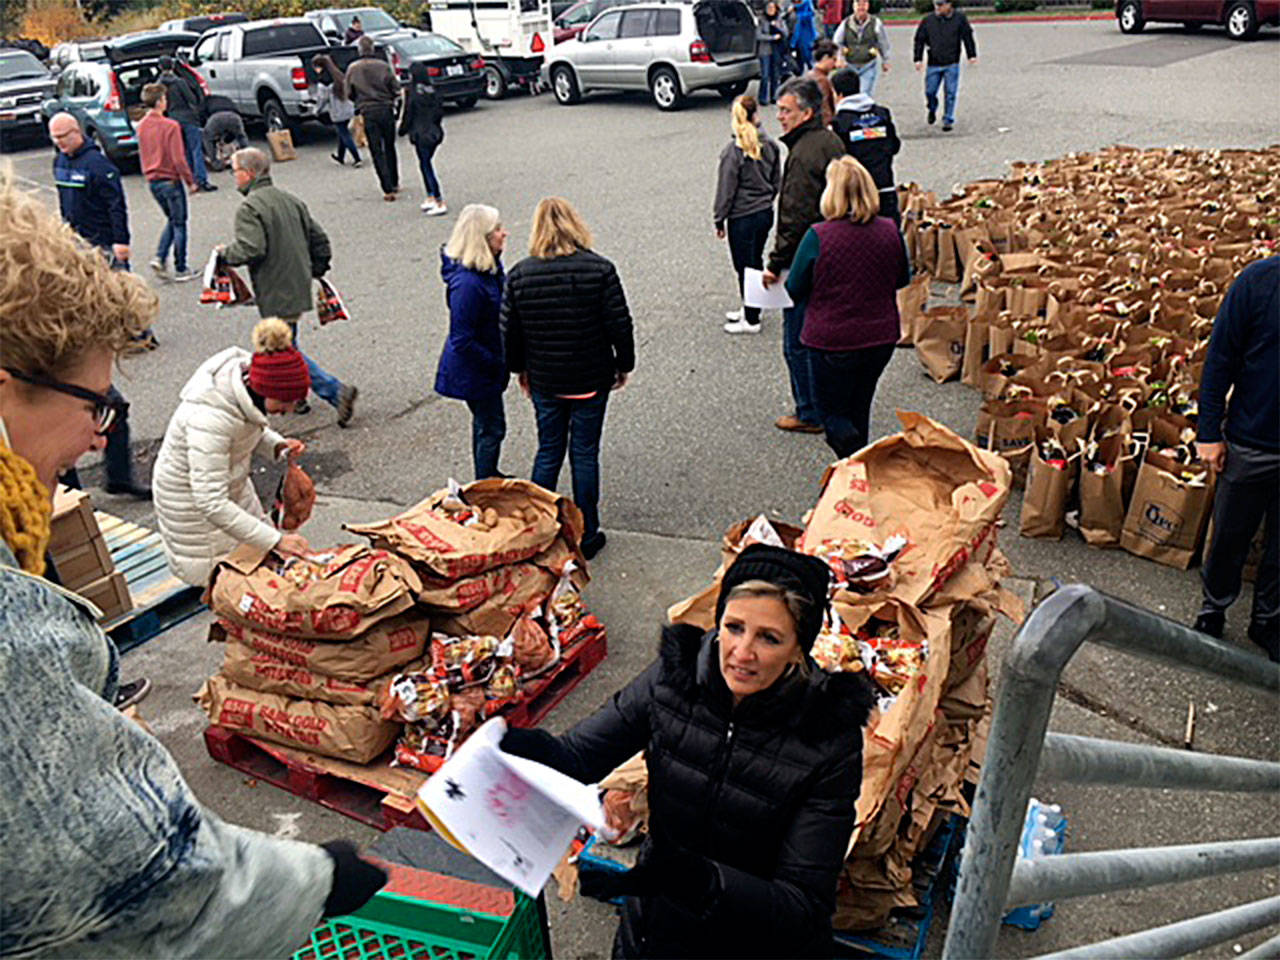 The South Everett-Mukilteo Rotary Club on Nov. 19 assembled 350 bags filled with all the fixings for a Thanksgiving feast to deliver to families in need. (Contributed photo)